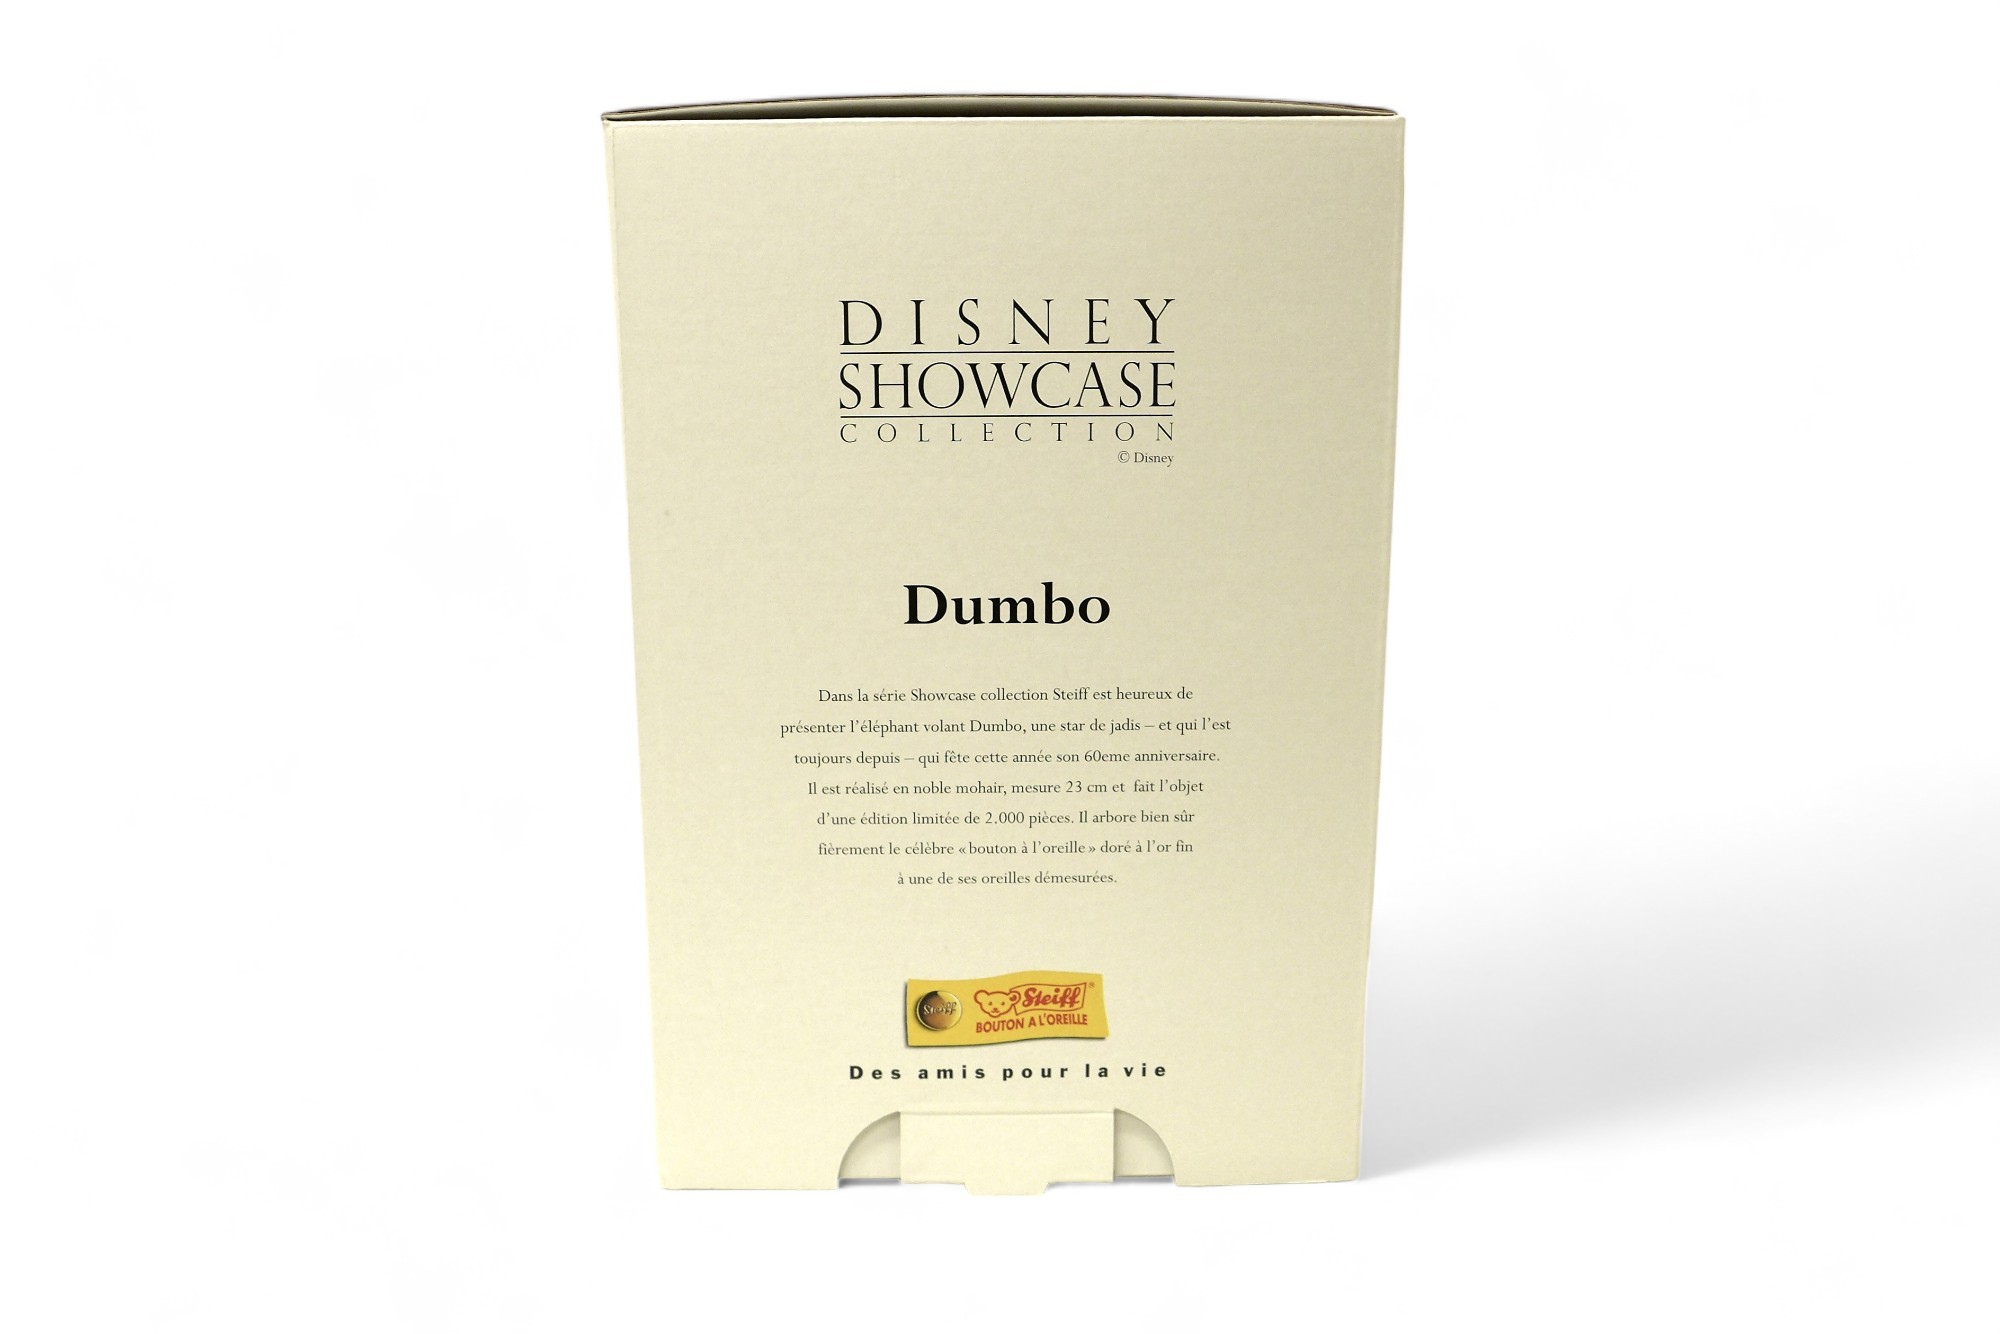 Steiff Dumbo Disney Showcase Collection to celebrate Dumbo's 60th year, 23cm mohair bear, limited - Image 11 of 11